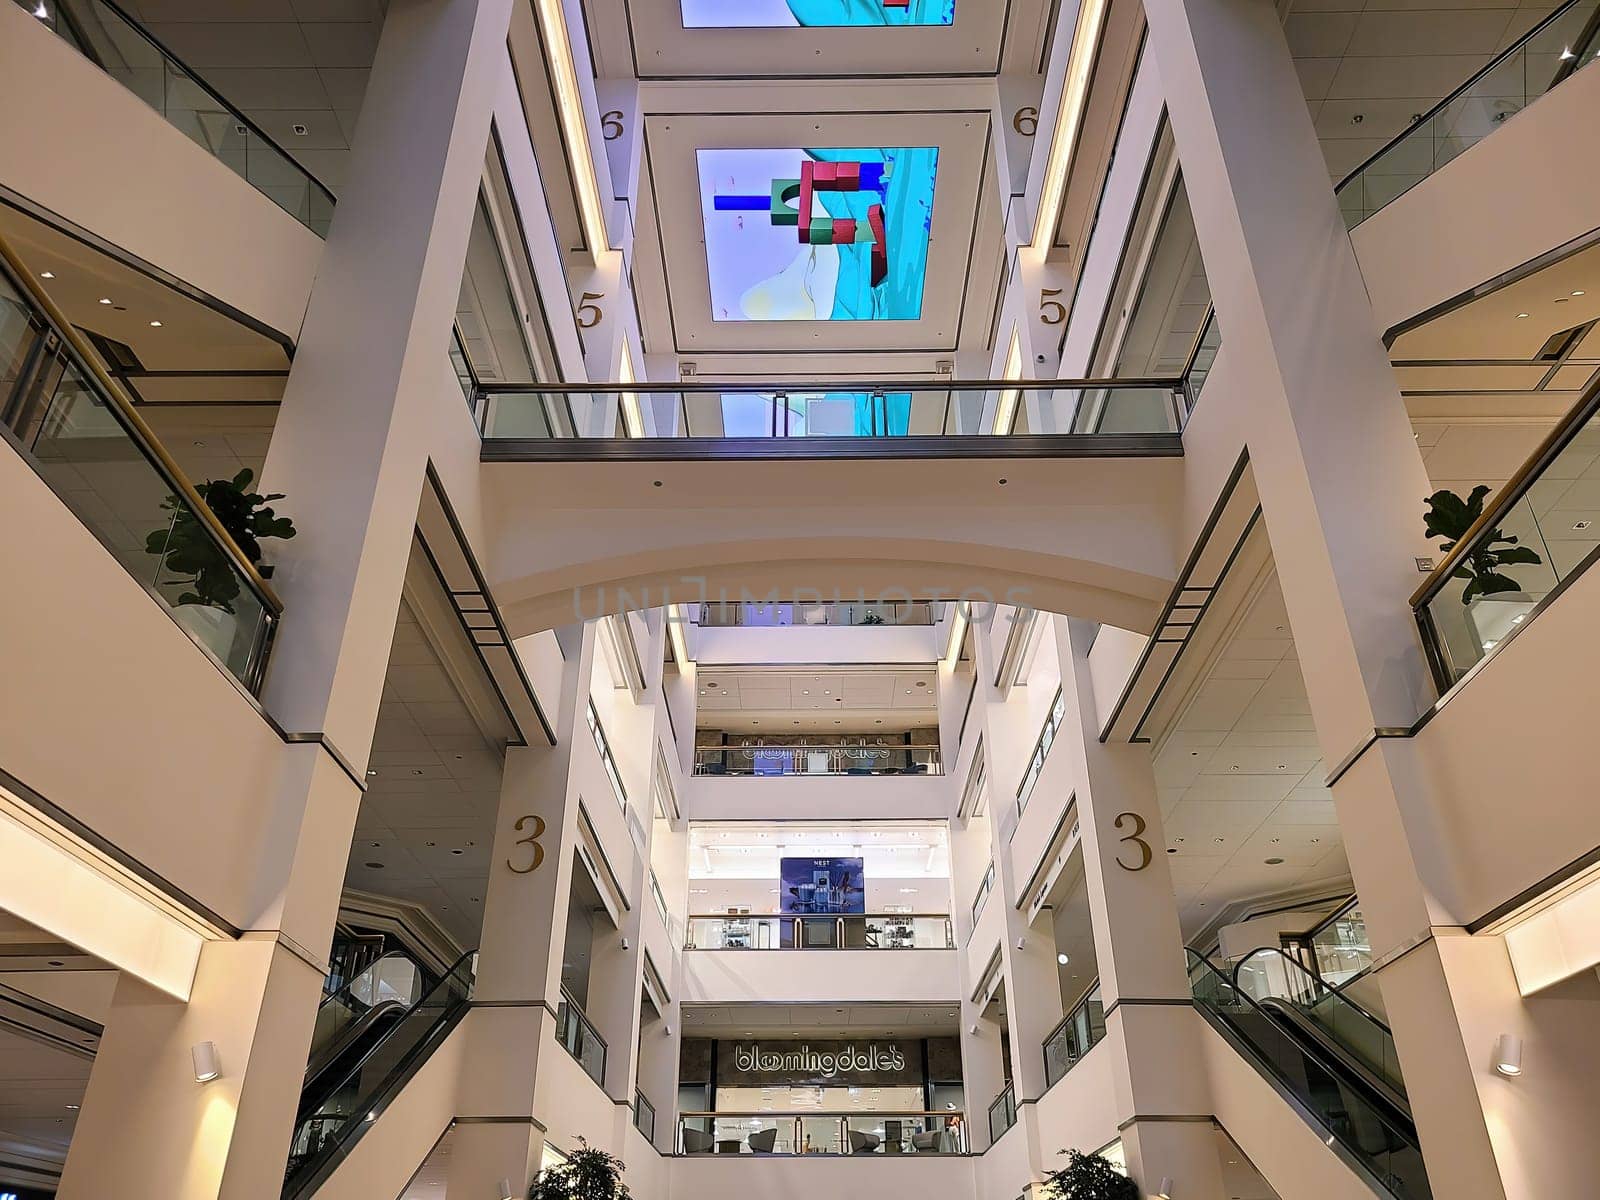 Multi-level modern shopping mall in Chicago, 2023, featuring a sleek glass design, digital advertising, and prominent escalators